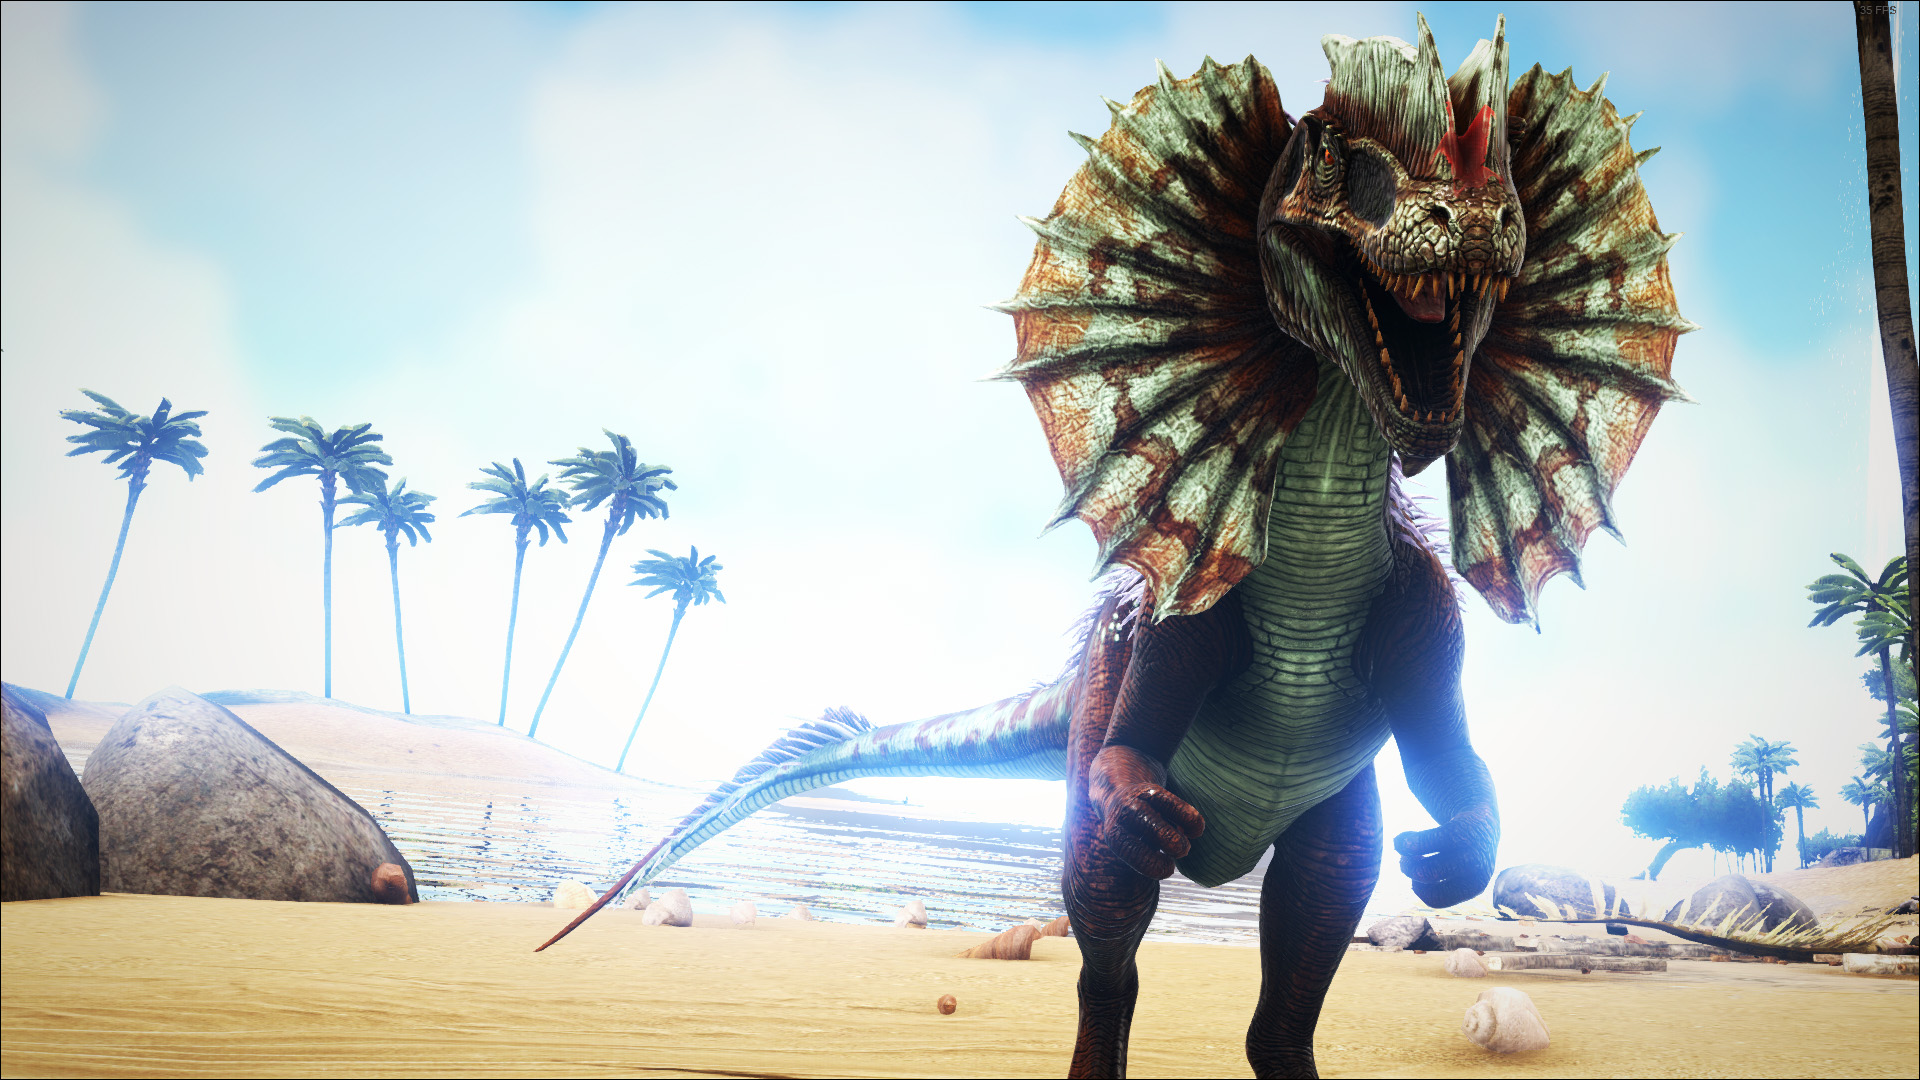 60+ ARK: Survival Evolved HD Wallpapers and Backgrounds